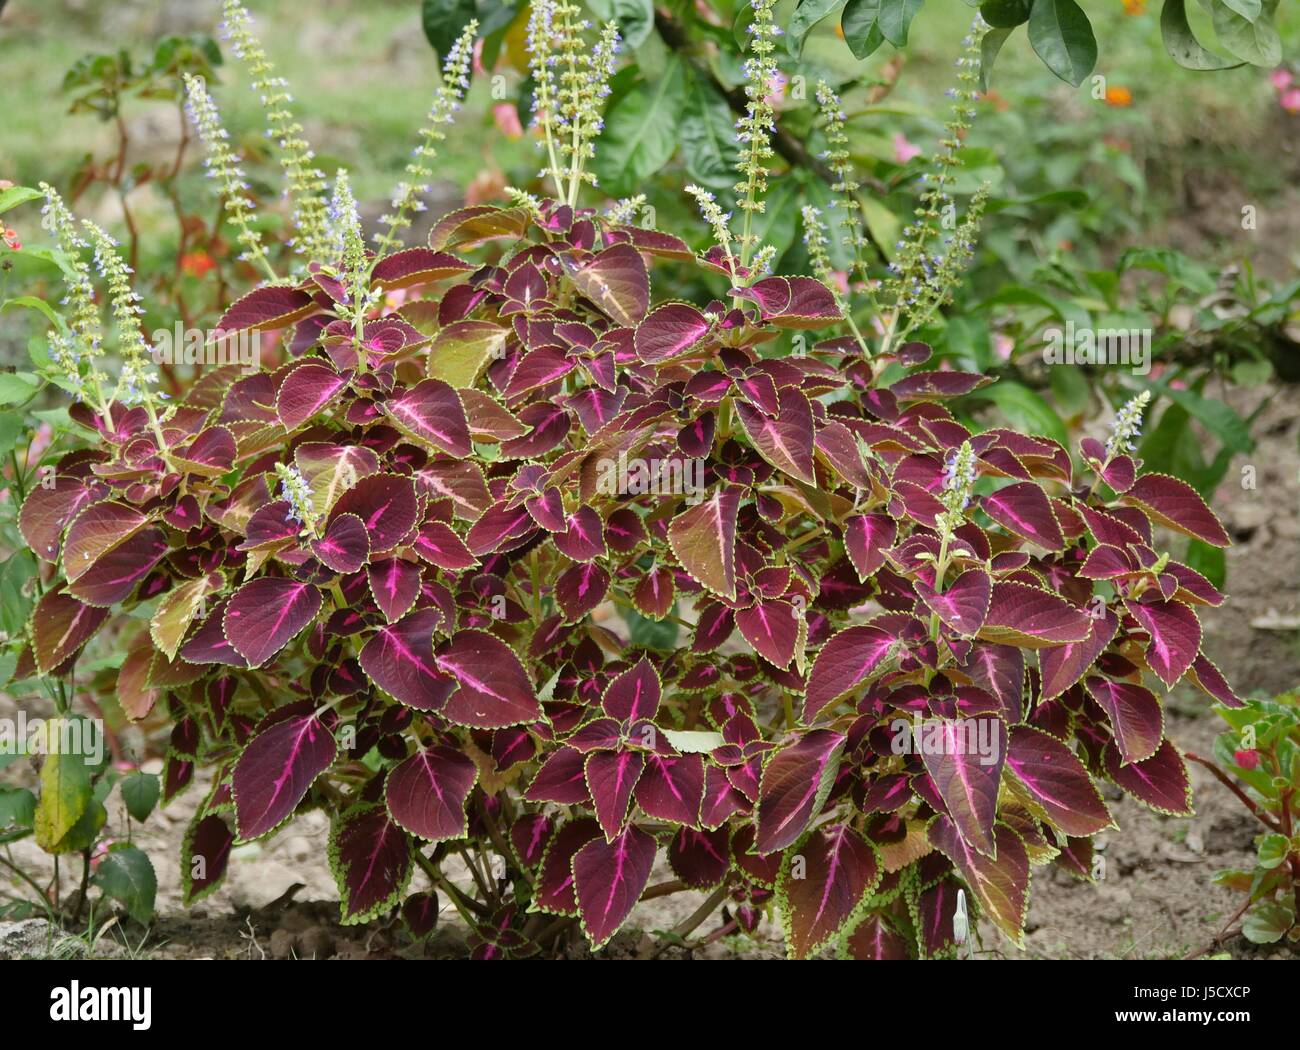 Plant with many known medicinal benefits Stock Photo